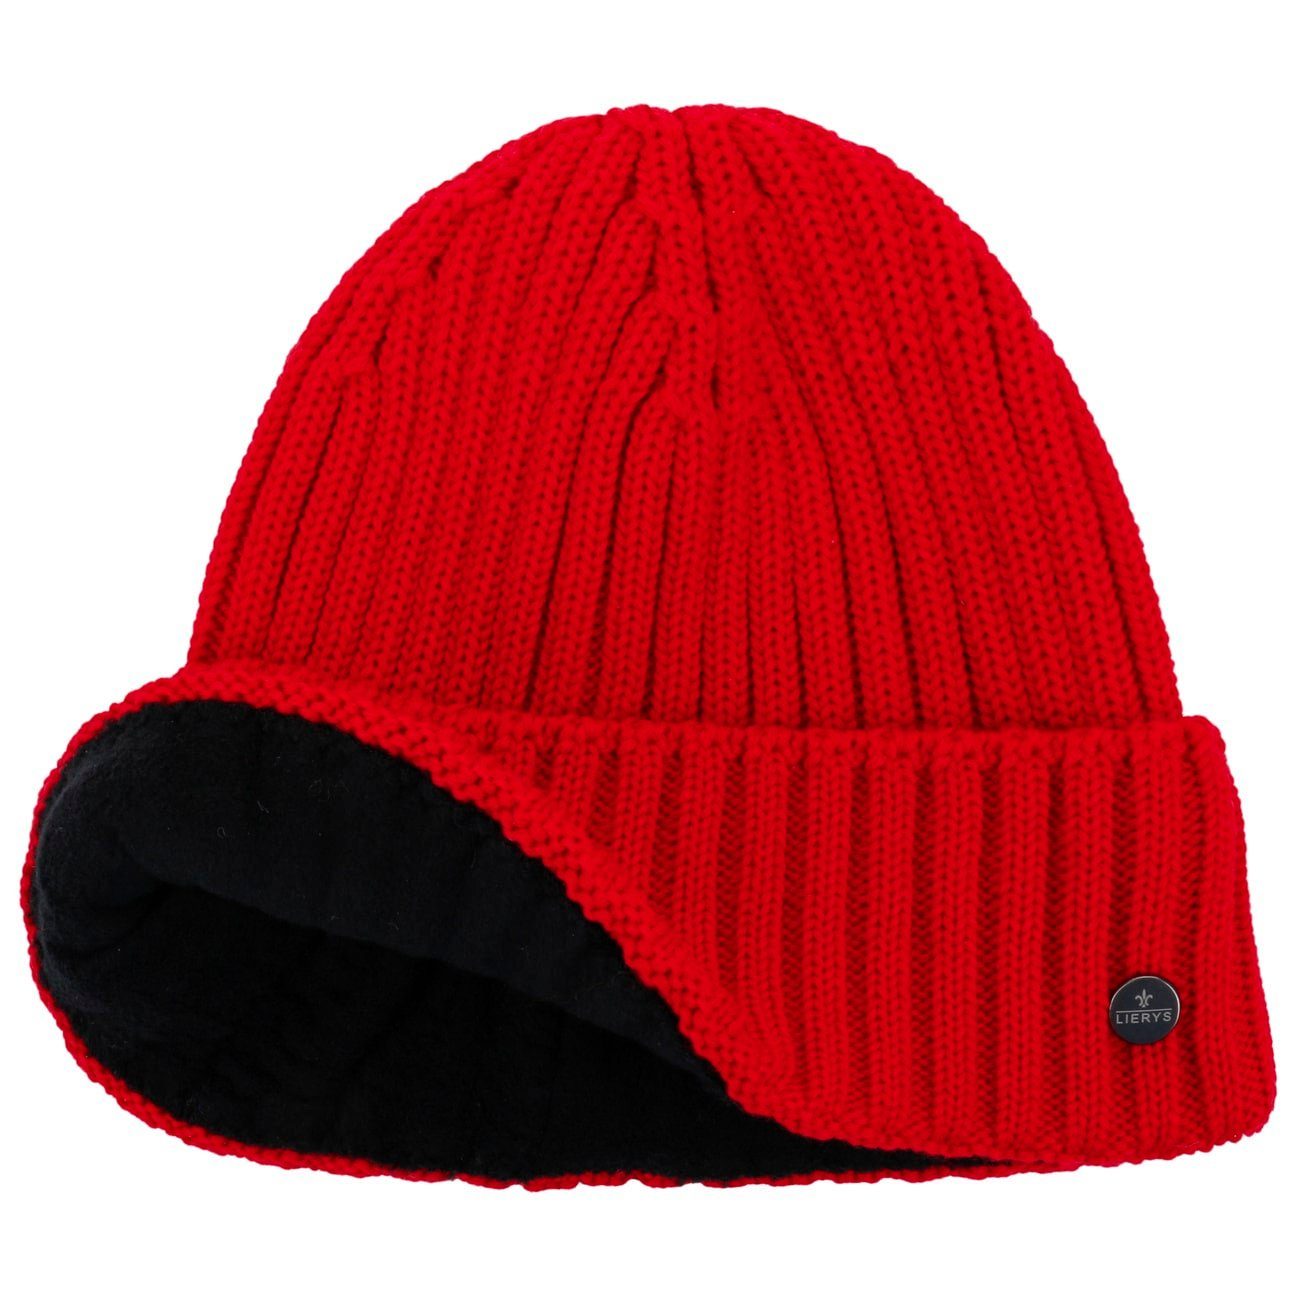 Lierys Beanie (1-St) rot Futter, in Germany Made Beanie mit